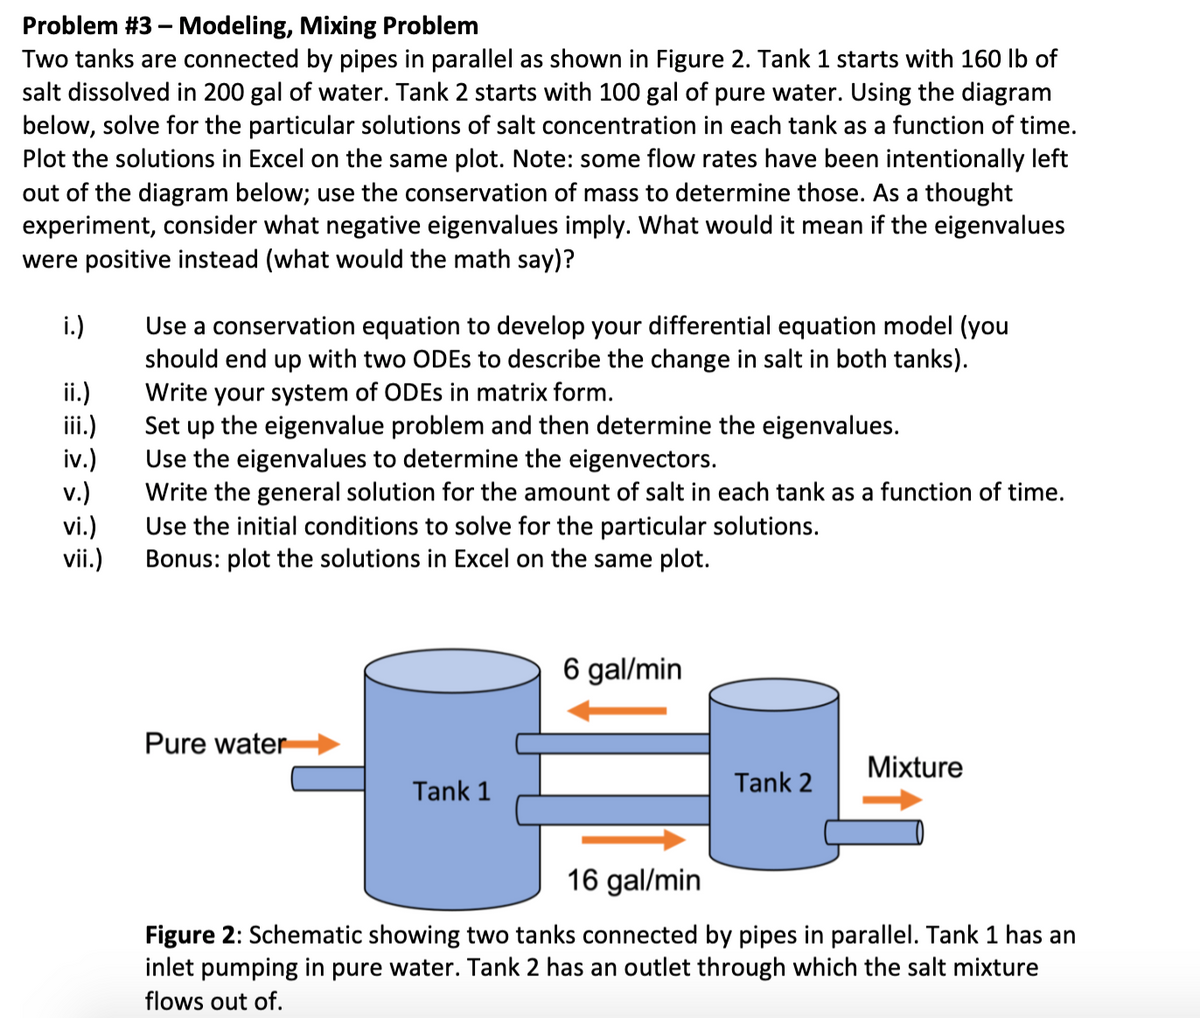 Problem #3 - Modeling, Mixing Problem
Two tanks are connected by pipes in parallel as shown in Figure 2. Tank 1 starts with 160 lb of
salt dissolved in 200 gal of water. Tank 2 starts with 100 gal of pure water. Using the diagram
below, solve for the particular solutions of salt concentration in each tank as a function of time.
Plot the solutions in Excel on the same plot. Note: some flow rates have been intentionally left
out of the diagram below; use the conservation of mass to determine those. As a thought
experiment, consider what negative eigenvalues imply. What would it mean if the eigenvalues
were positive instead (what would the math say)?
i.)
ii.)
iii.)
iv.)
v.)
vi.)
vii.)
Use a conservation equation to develop your differential equation model (you
should end up with two ODEs to describe the change in salt in both tanks).
Write your system of ODEs in matrix form.
Set up the eigenvalue problem and then determine the eigenvalues.
Use the eigenvalues to determine the eigenvectors.
Write the general solution for the amount of salt in each tank as a function of time.
Use the initial conditions to solve for the particular solutions.
Bonus: plot the solutions in Excel on the same plot.
Pure water
Tank 1
6 gal/min
Tank 2
Mixture
16 gal/min
Figure 2: Schematic showing two tanks connected by pipes in parallel. Tank 1 has an
inlet pumping in pure water. Tank 2 has an outlet through which the salt mixture
flows out of.